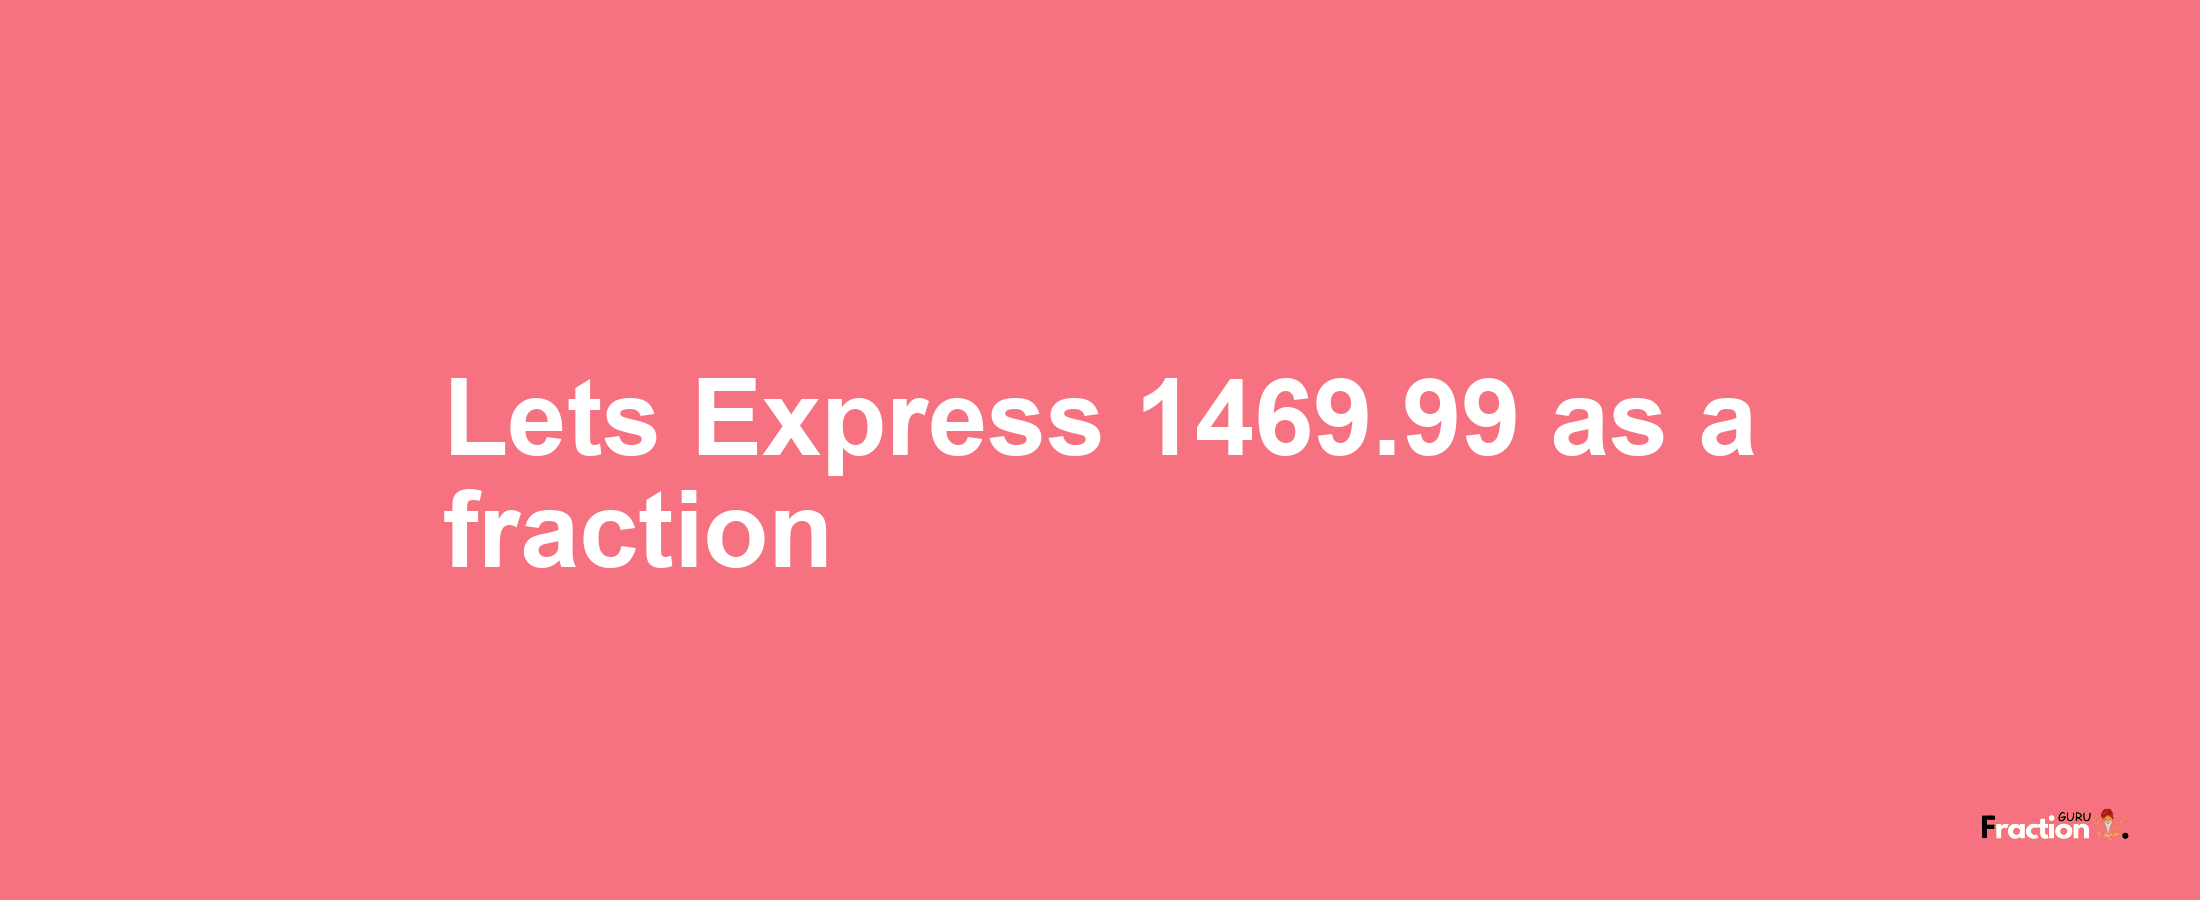 Lets Express 1469.99 as afraction